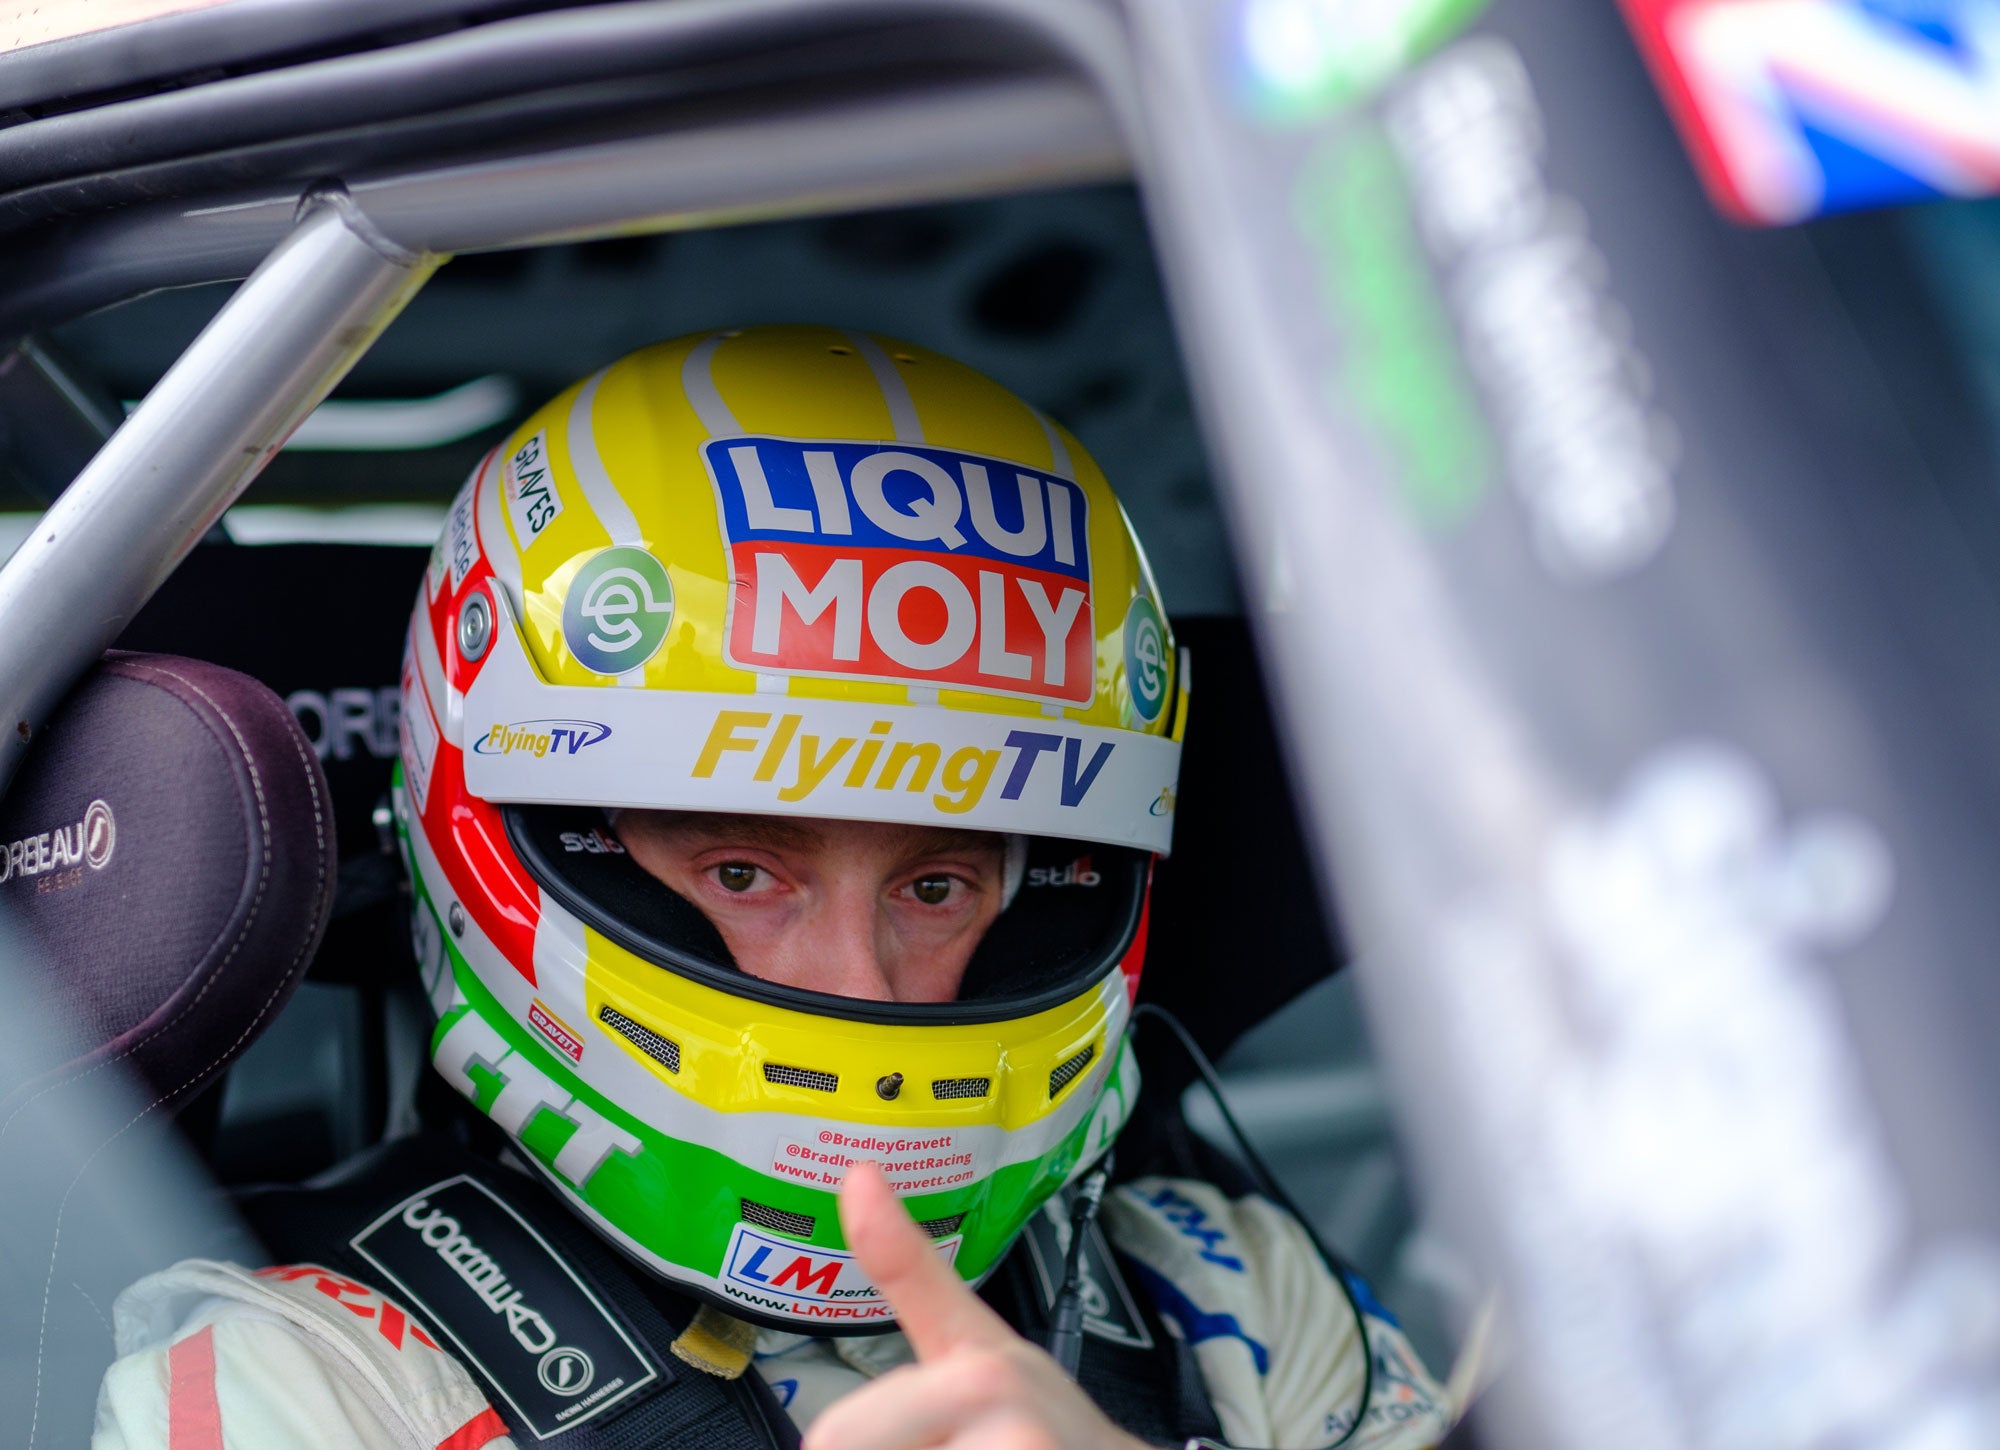 Bradley Gravett son of BTCC British Touring Car Champion Robb Gravett in the MINI Challenge JCW Series at Brands Hatch Indy in 2022 Bradley Sat in Car Giving Thumbs Up Graves Motorsport Cooper Racing Driver LIQUI MOLY LM Performance